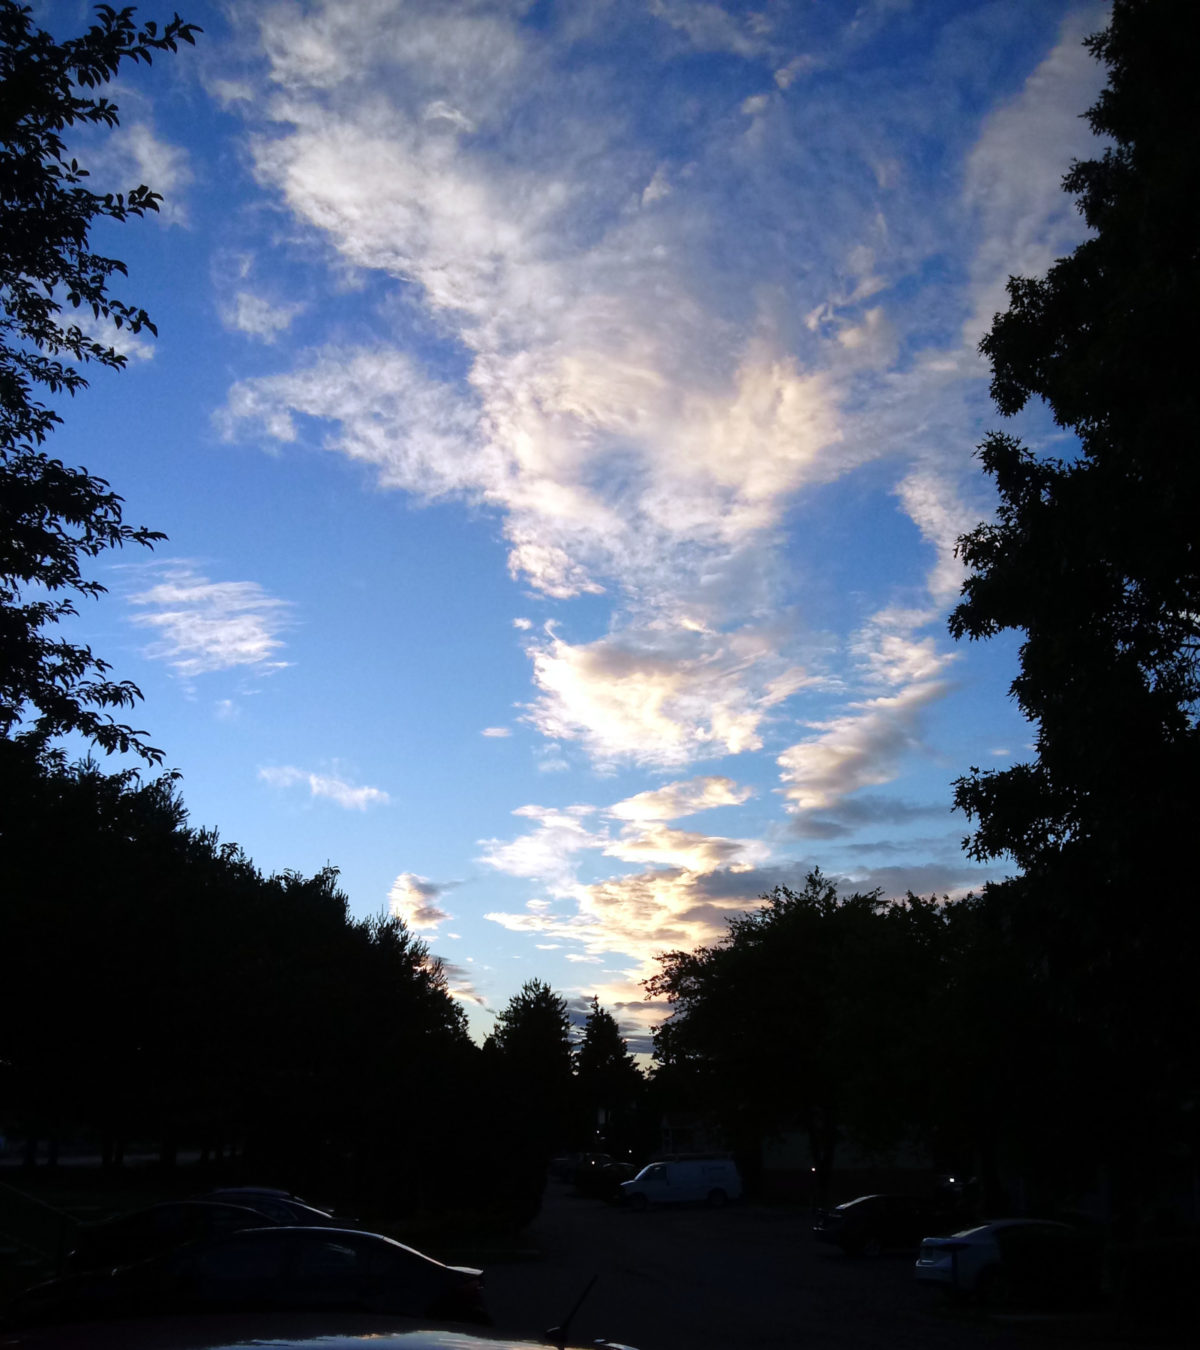 Clouds at Sunset, July 10